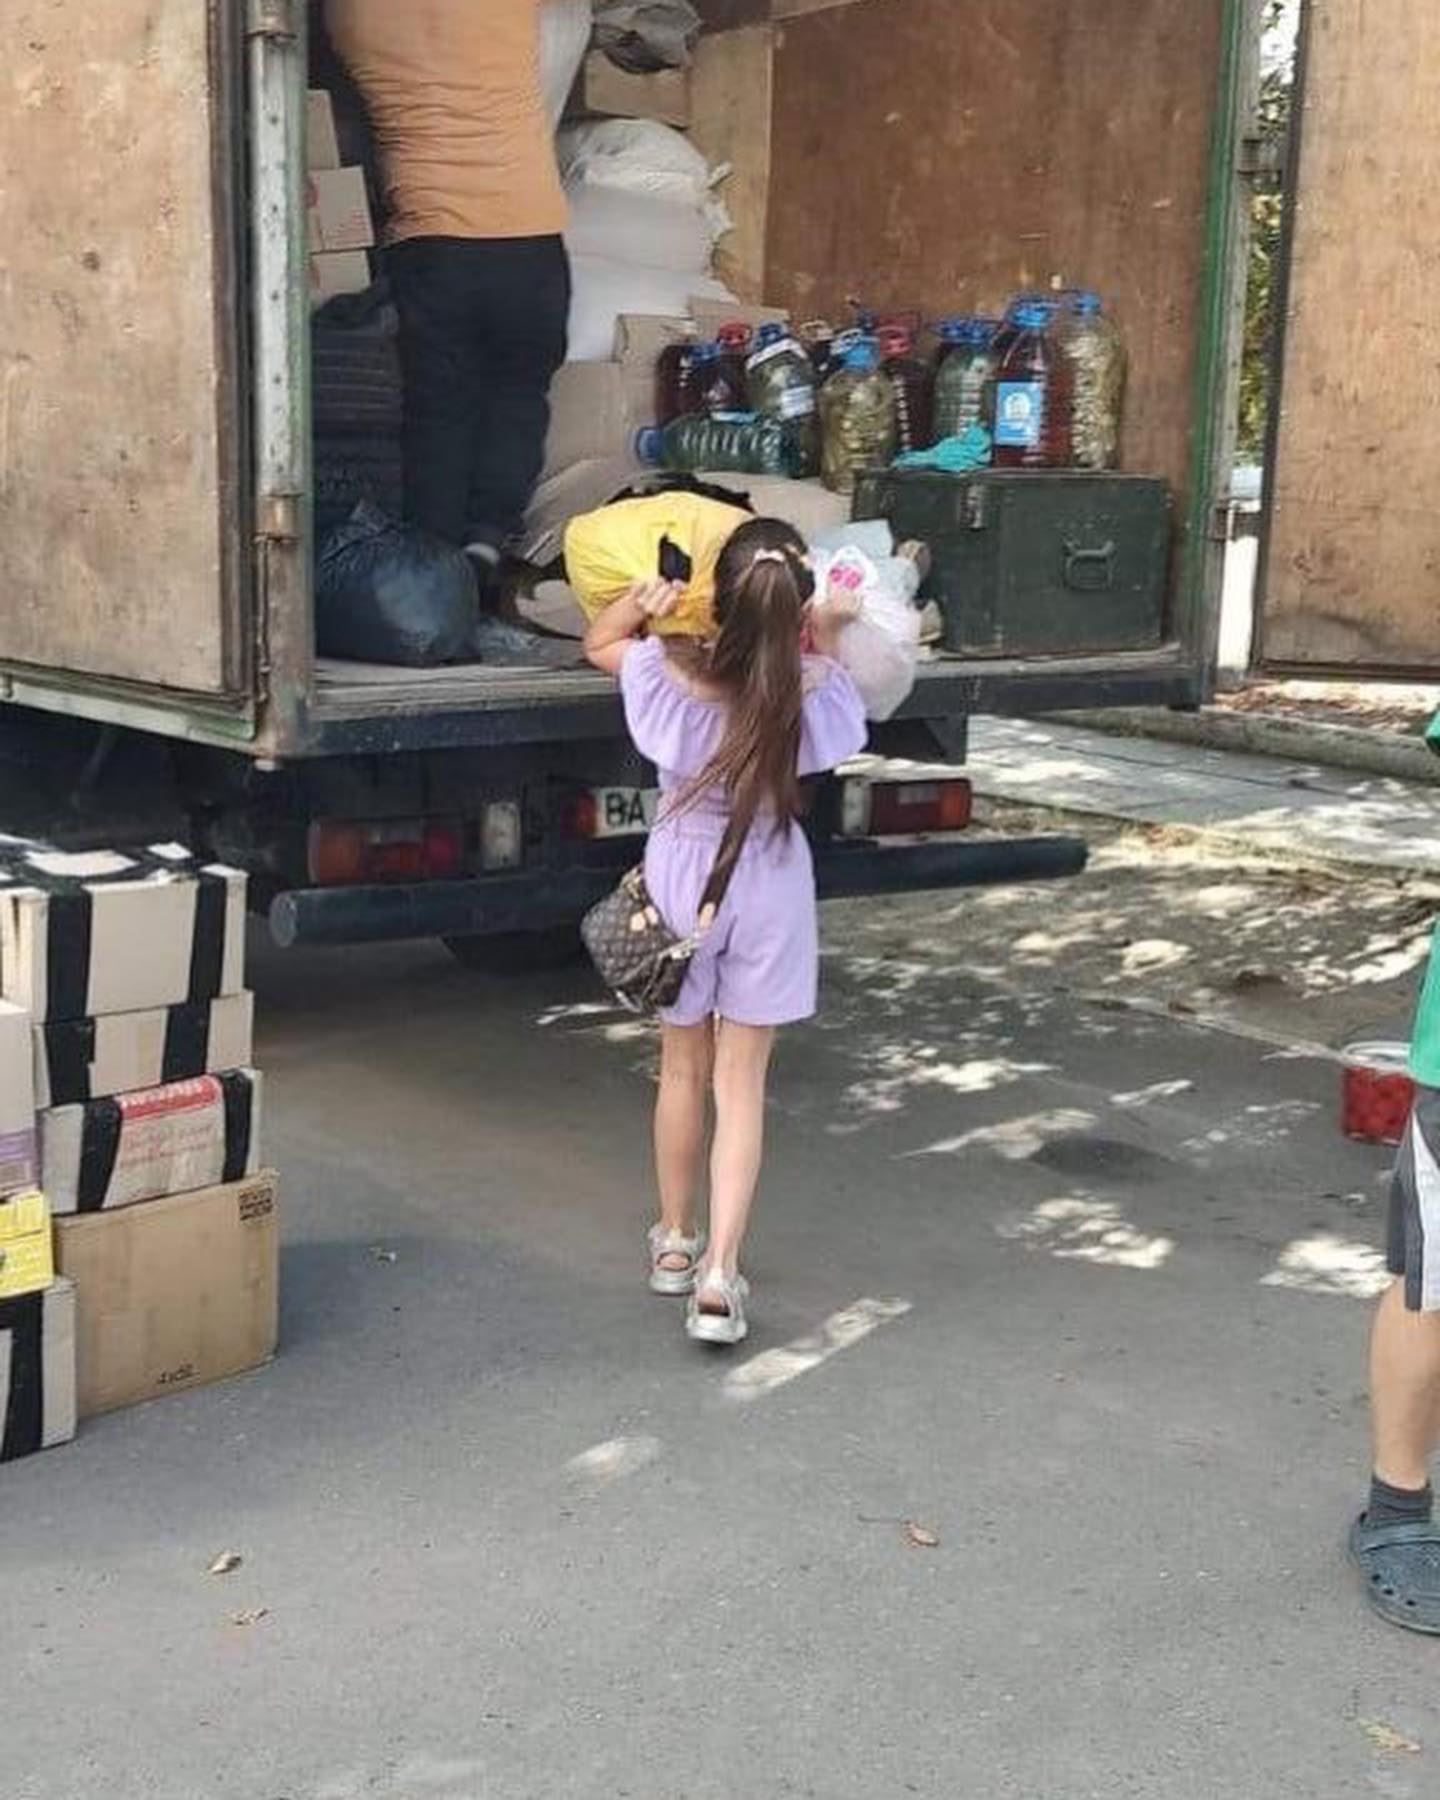 A group of people loading a truck with boxes.